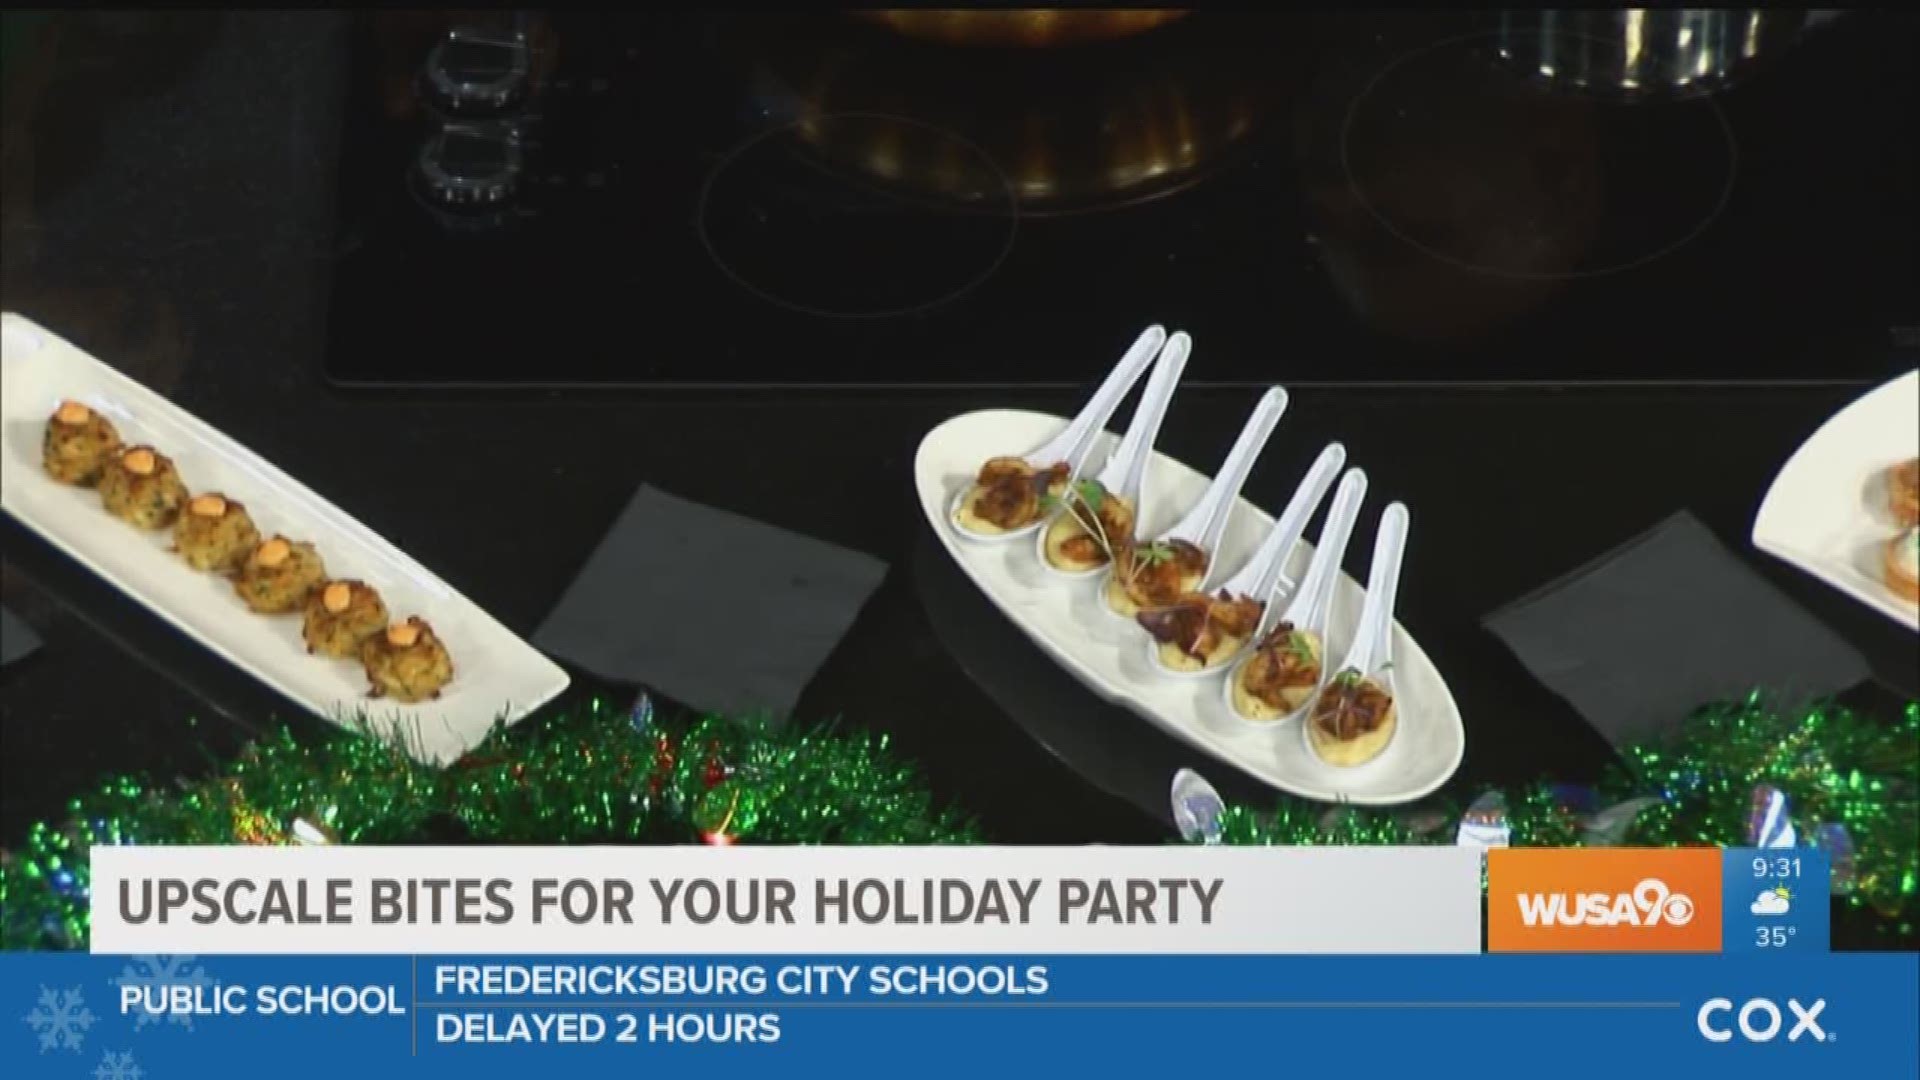 David Clements, chef with Word of Mouth Catering shares some upscale appetizers for your next holiday party!